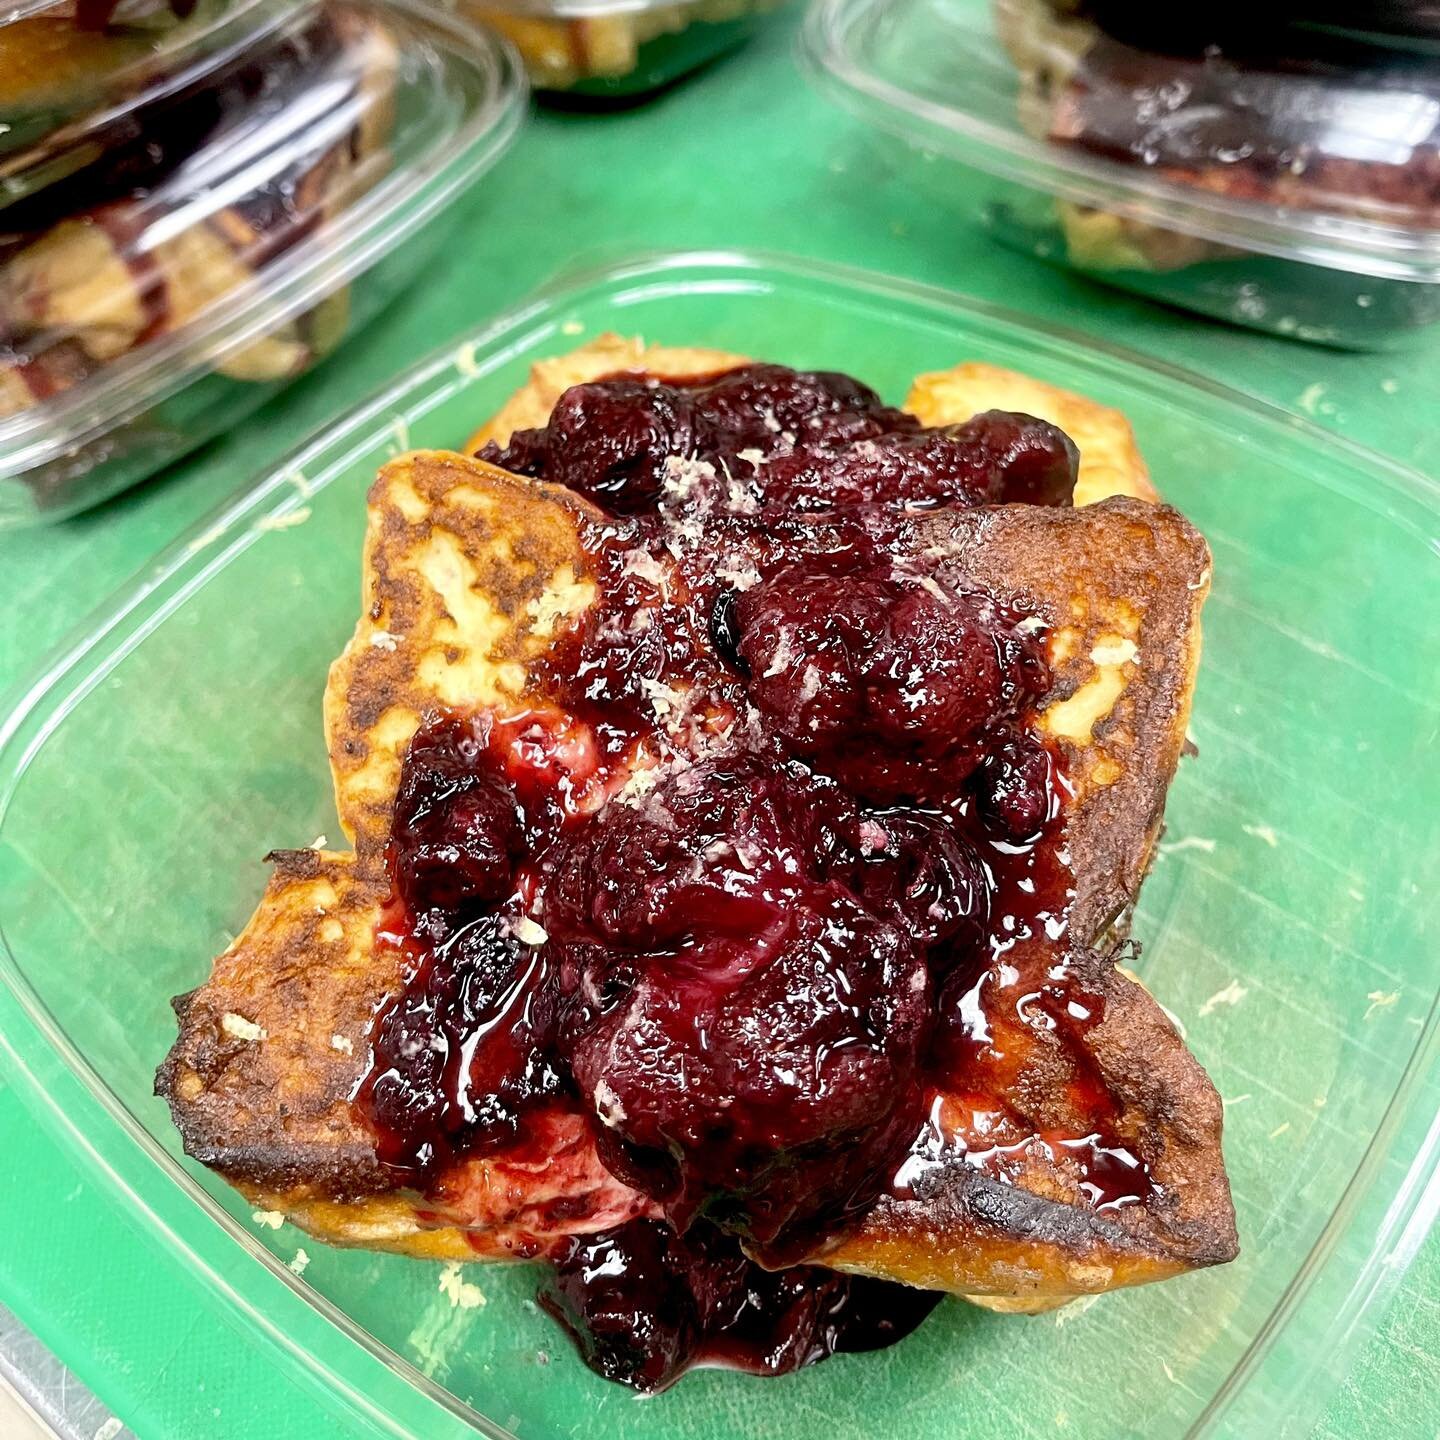 Happy Saturday! Need some breakfast? Our awesome kitchen team has cooked up Chef Xavier&rsquo;s special Brioche French Toast with with Berry Compote 🍓🫐 
Featured on his CBS 6 segment Thursday! 
.
.
.
.
#frenchtoast #briochebread  #virginiaisforlove